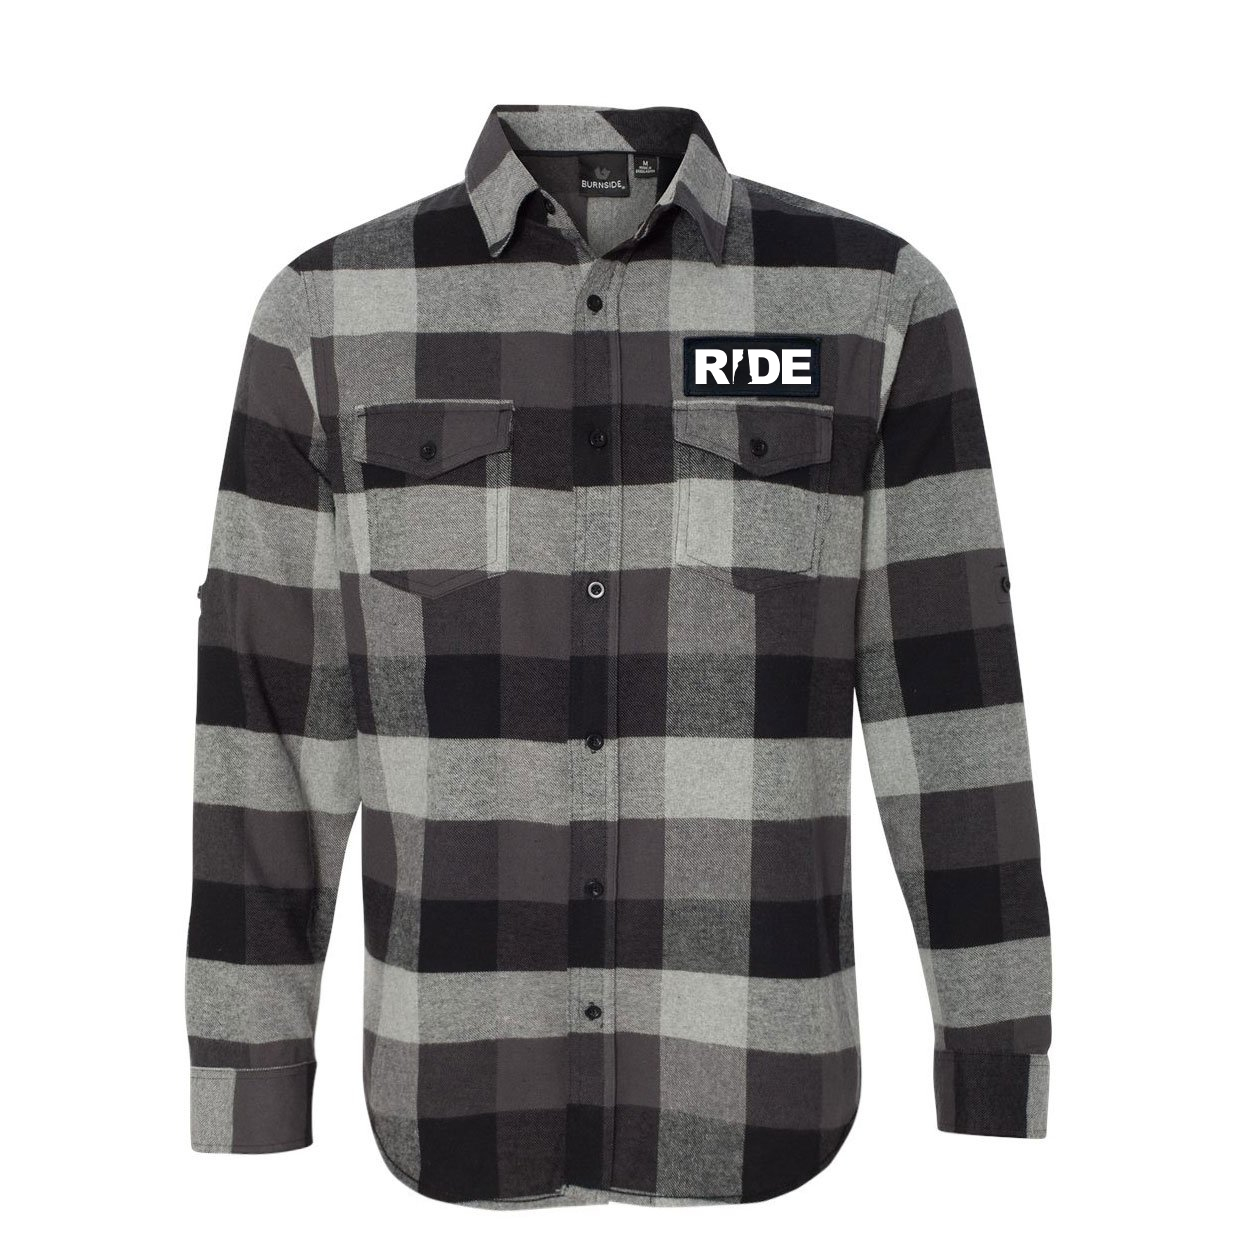 Ride New Hampshire Classic Unisex Long Sleeve Woven Patch Flannel Shirt Black/Gray (White Logo)